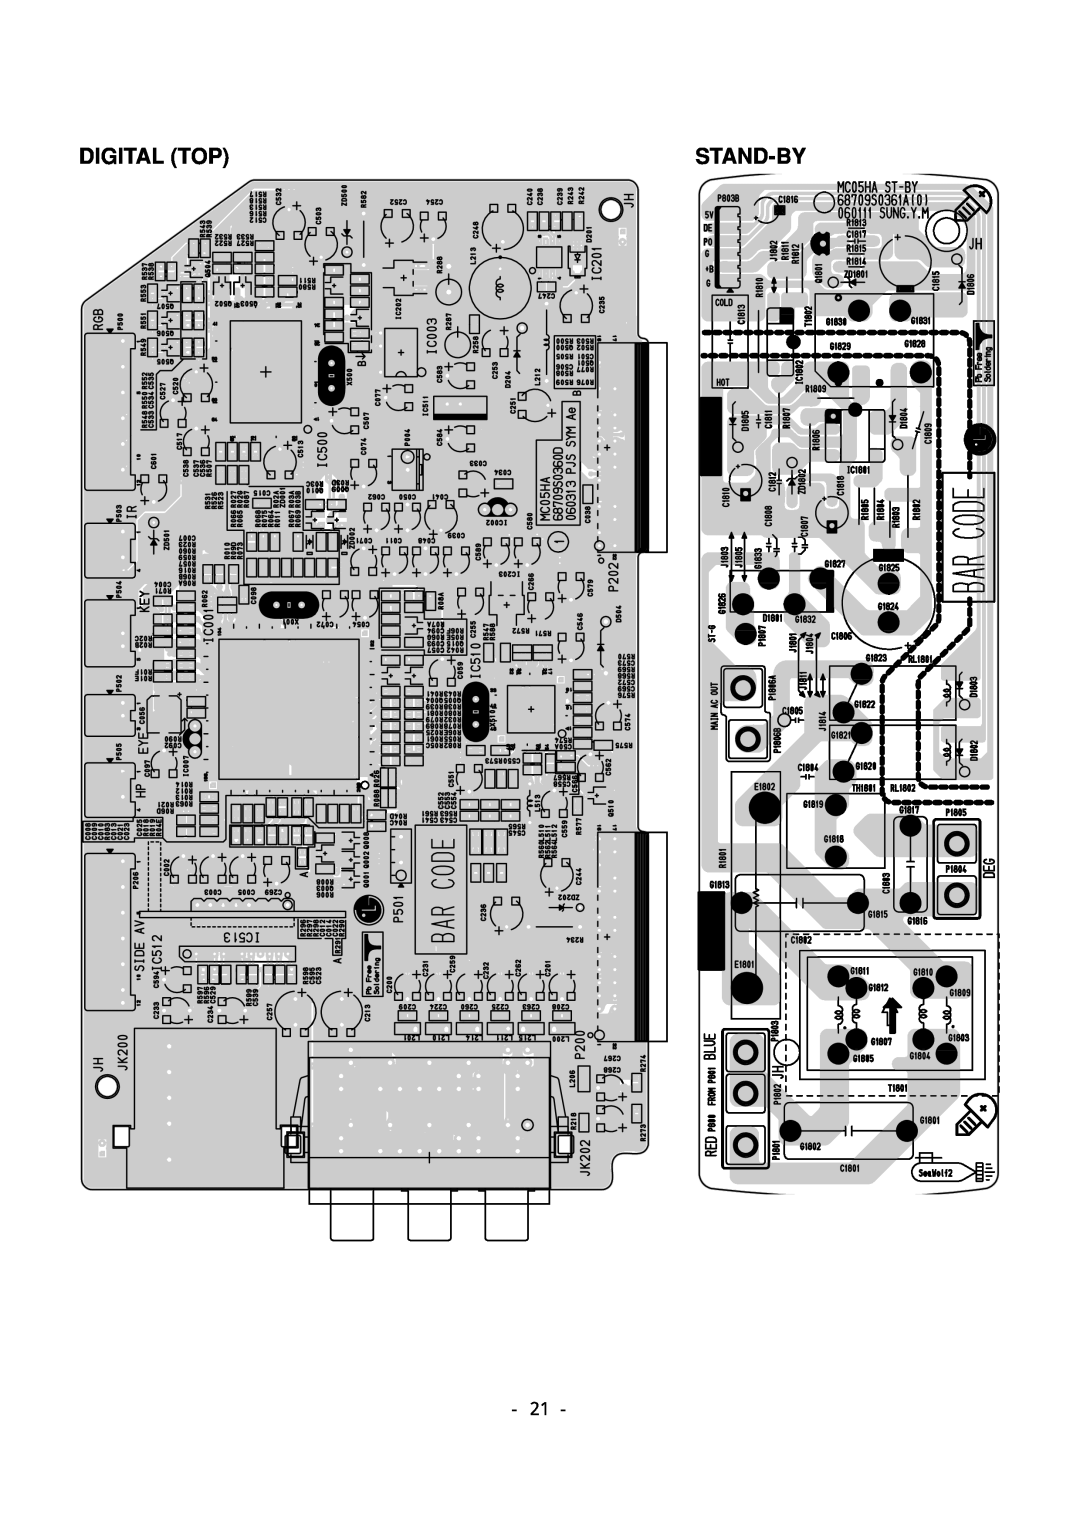 LG Electronics 29FS2AMB/ANX-ZE service manual Digital Top, Stand-By 